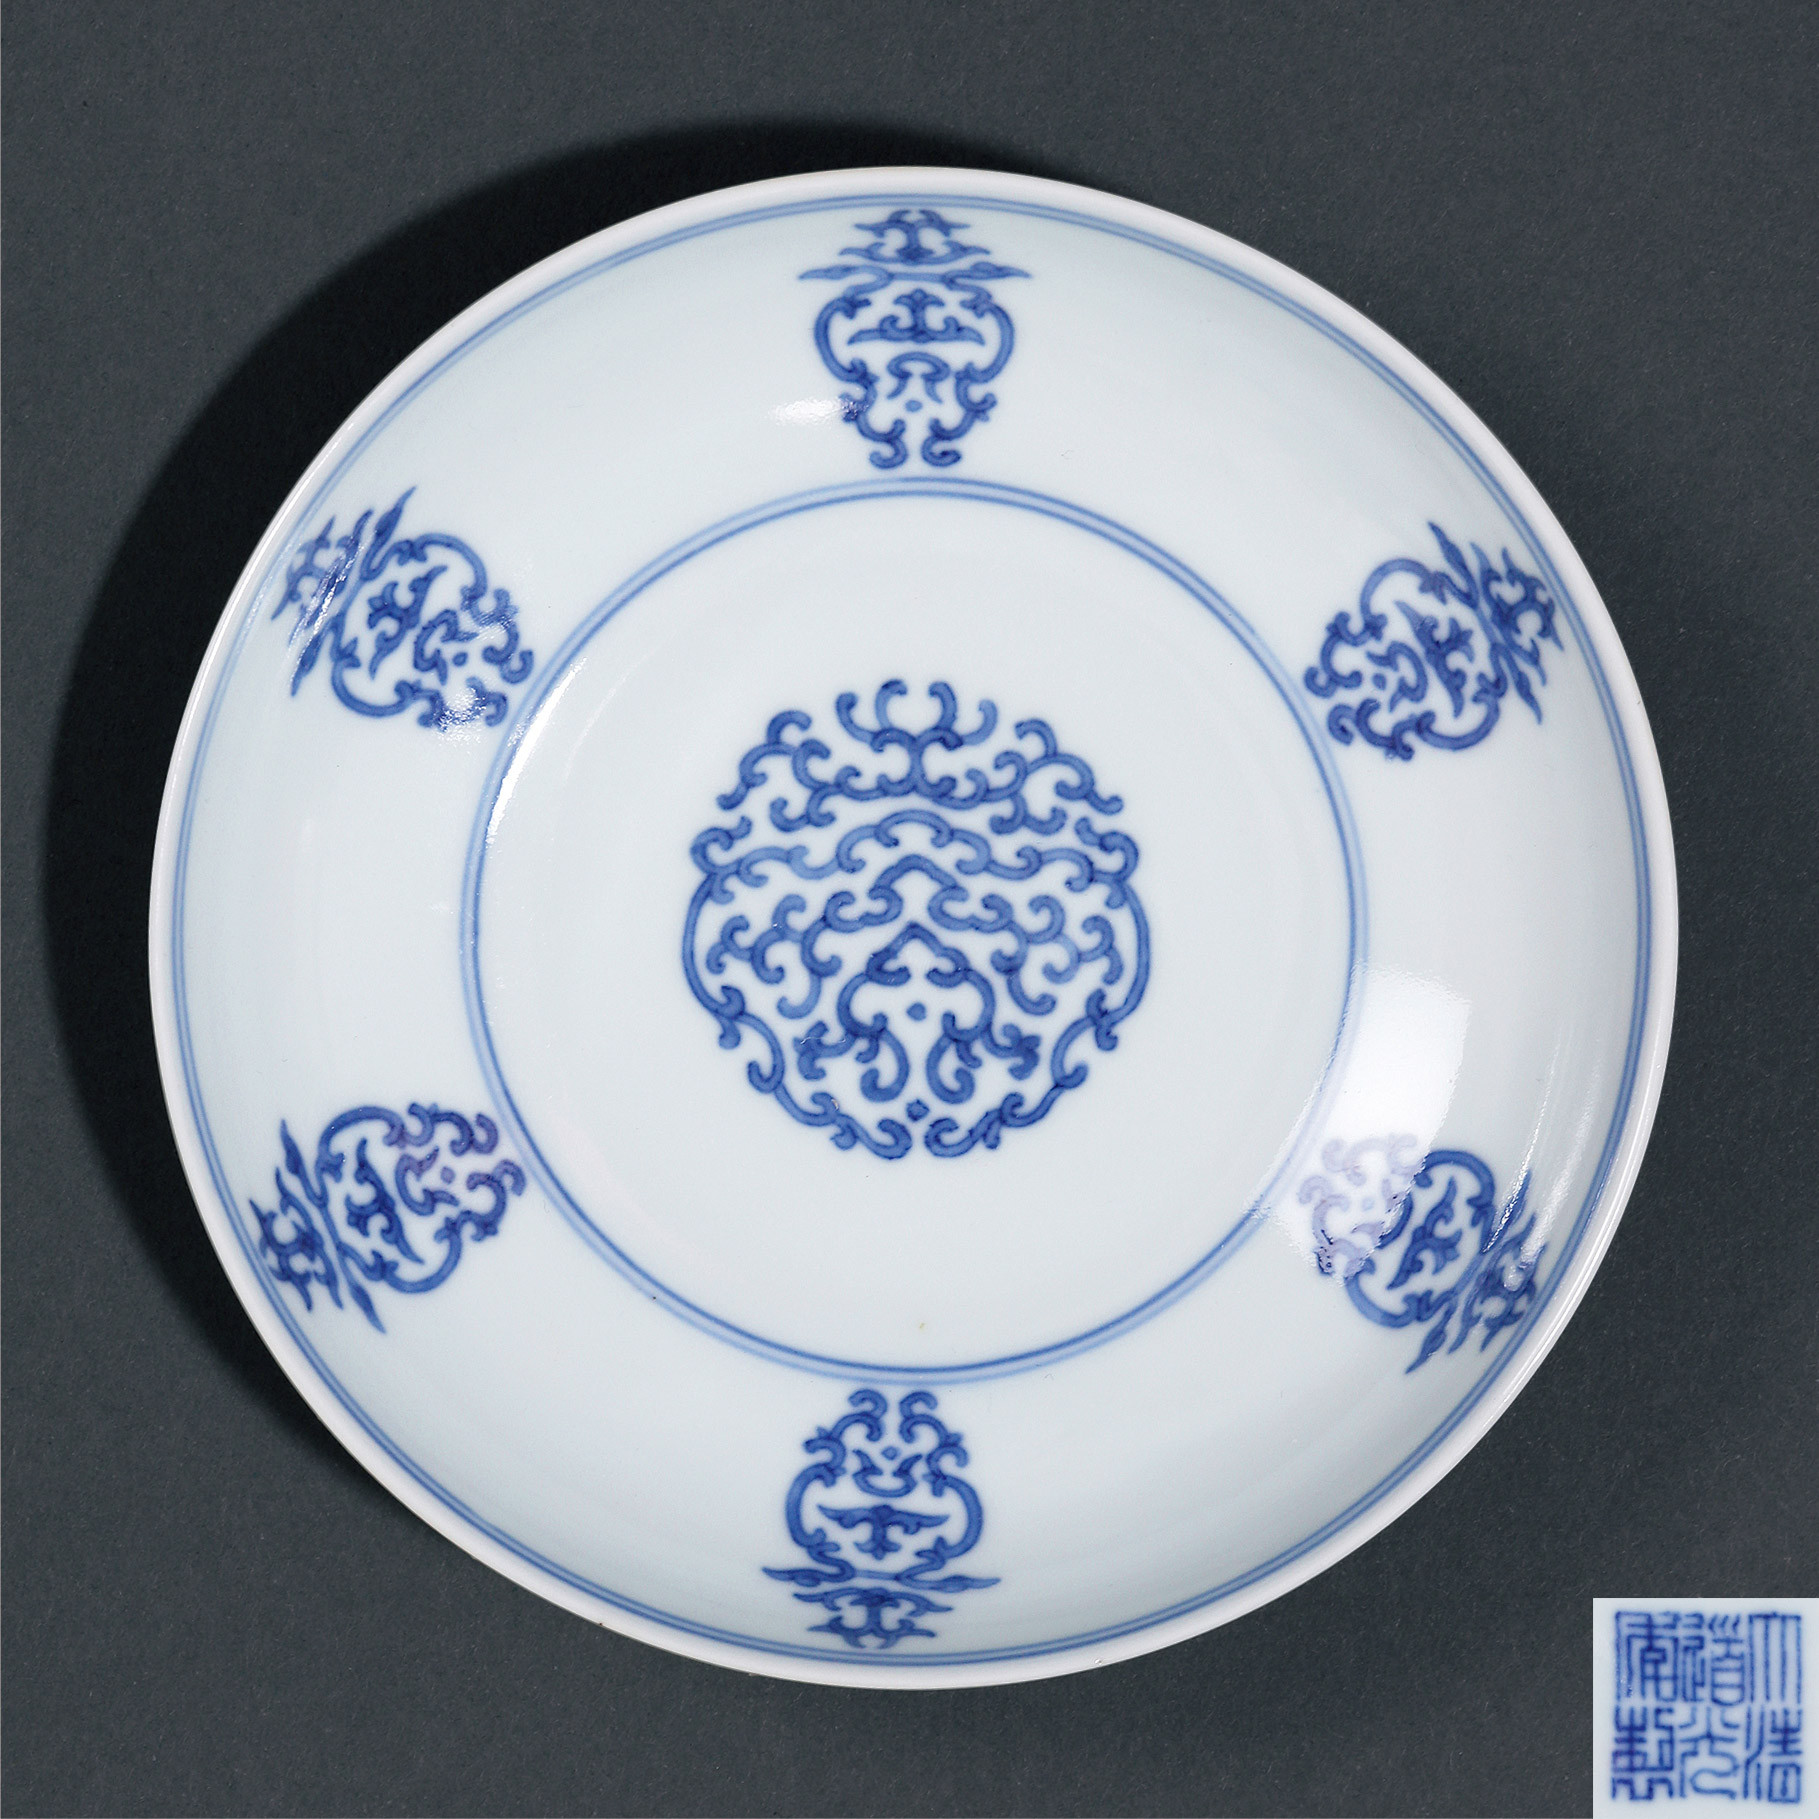 A BLUE AND WHITE PLATE WITH‘LONGEVITY’DESIGN